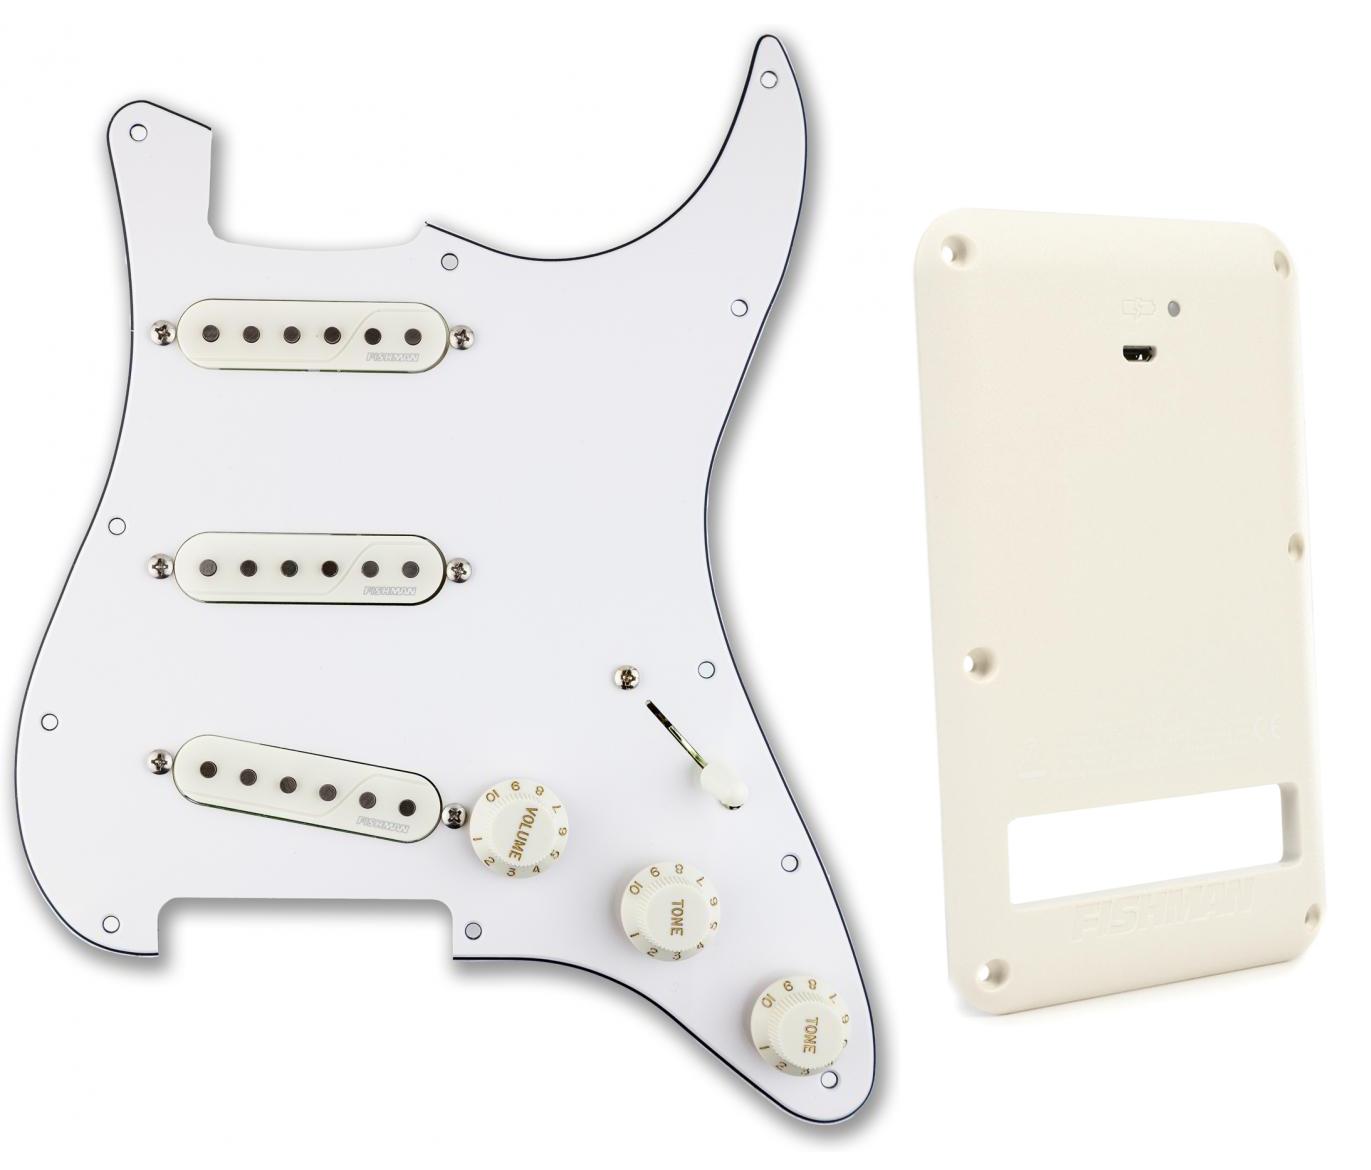 Fishman Fluence Stratocaster Loaded Pickguard - White with Battery Pack